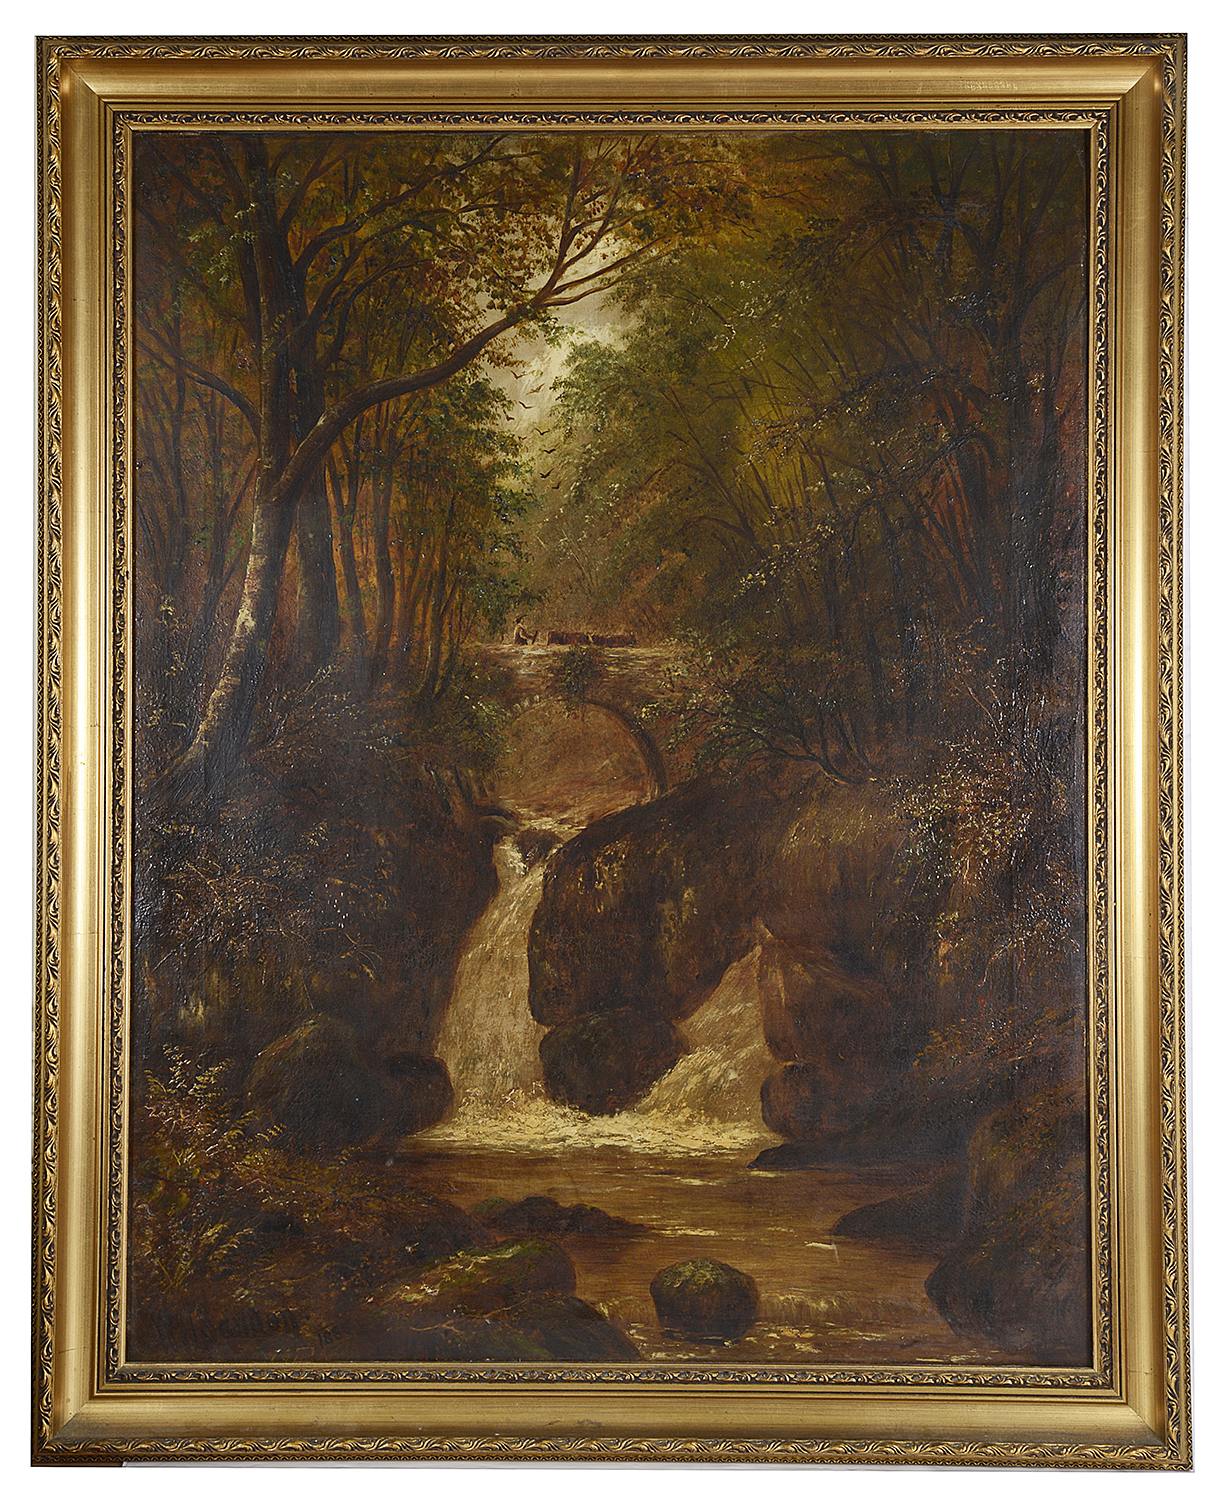 W H Sawdon (19th c. Brit.) A pair of wooded landscapes, oil on canvas - Image 2 of 2